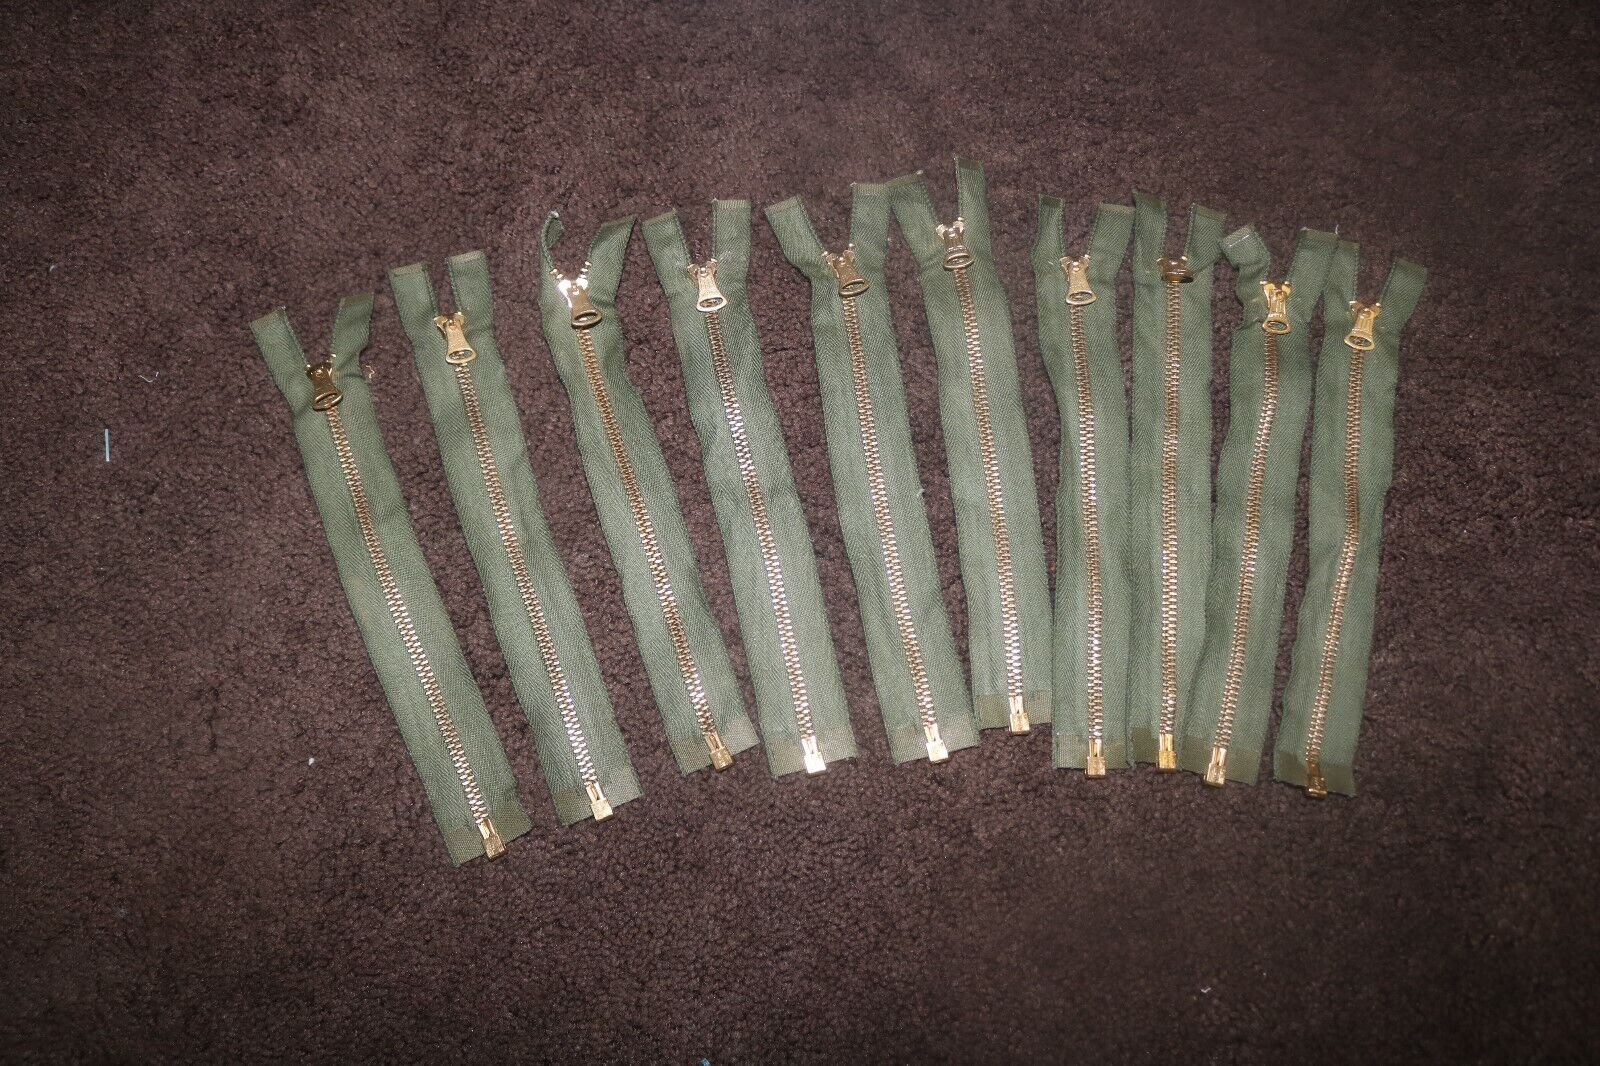 NOS lot of 10 vintage military Conmar Conmatic brass zippers 8 inch separating 